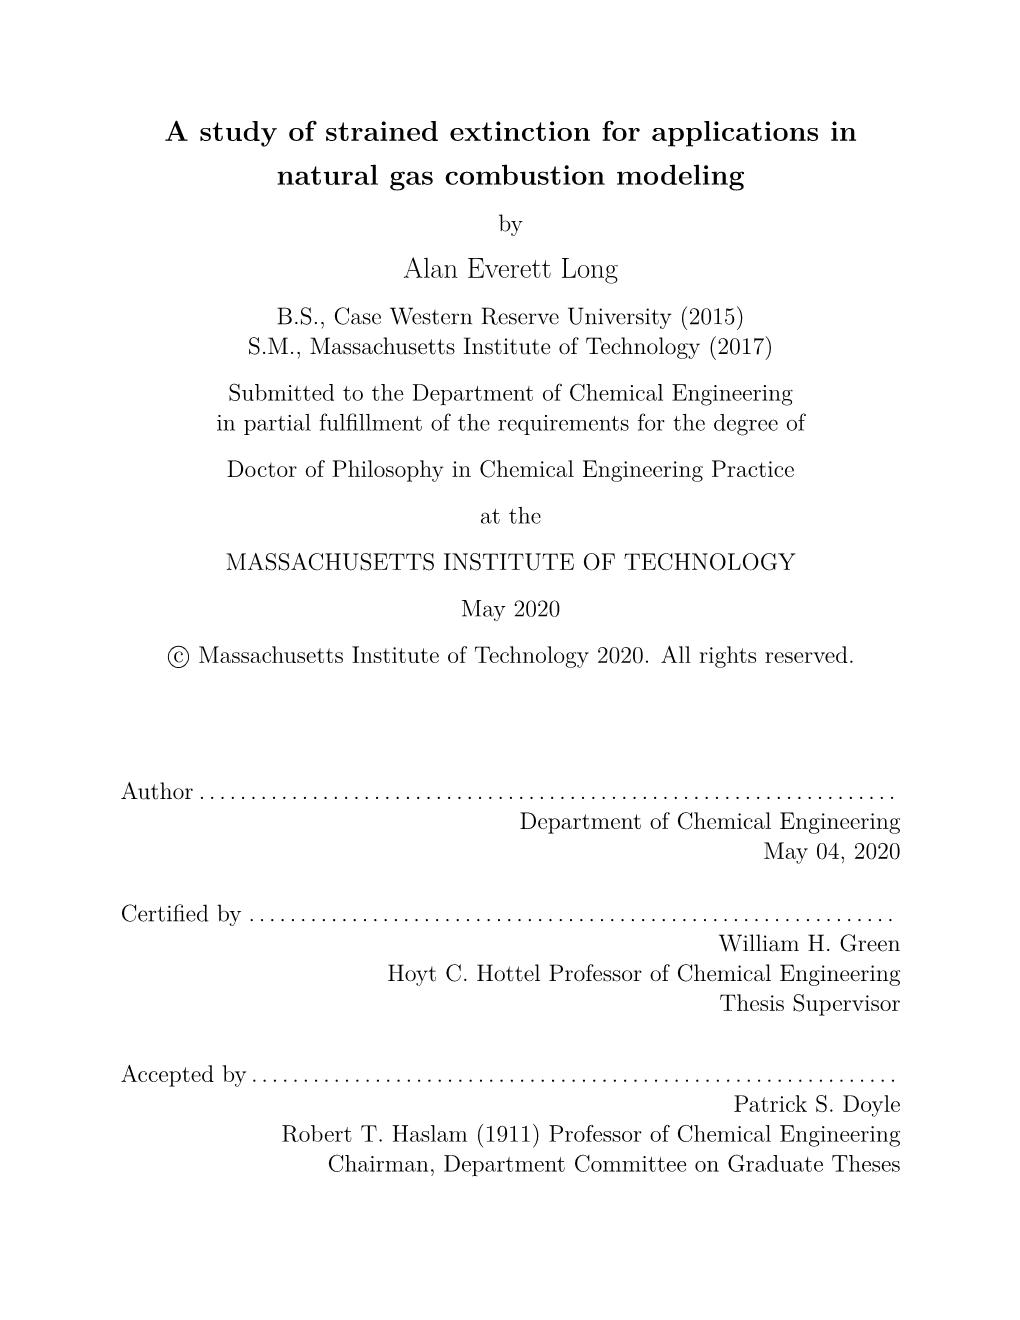 A Study of Strained Extinction for Applications in Natural Gas Combustion Modeling Alan Everett Long